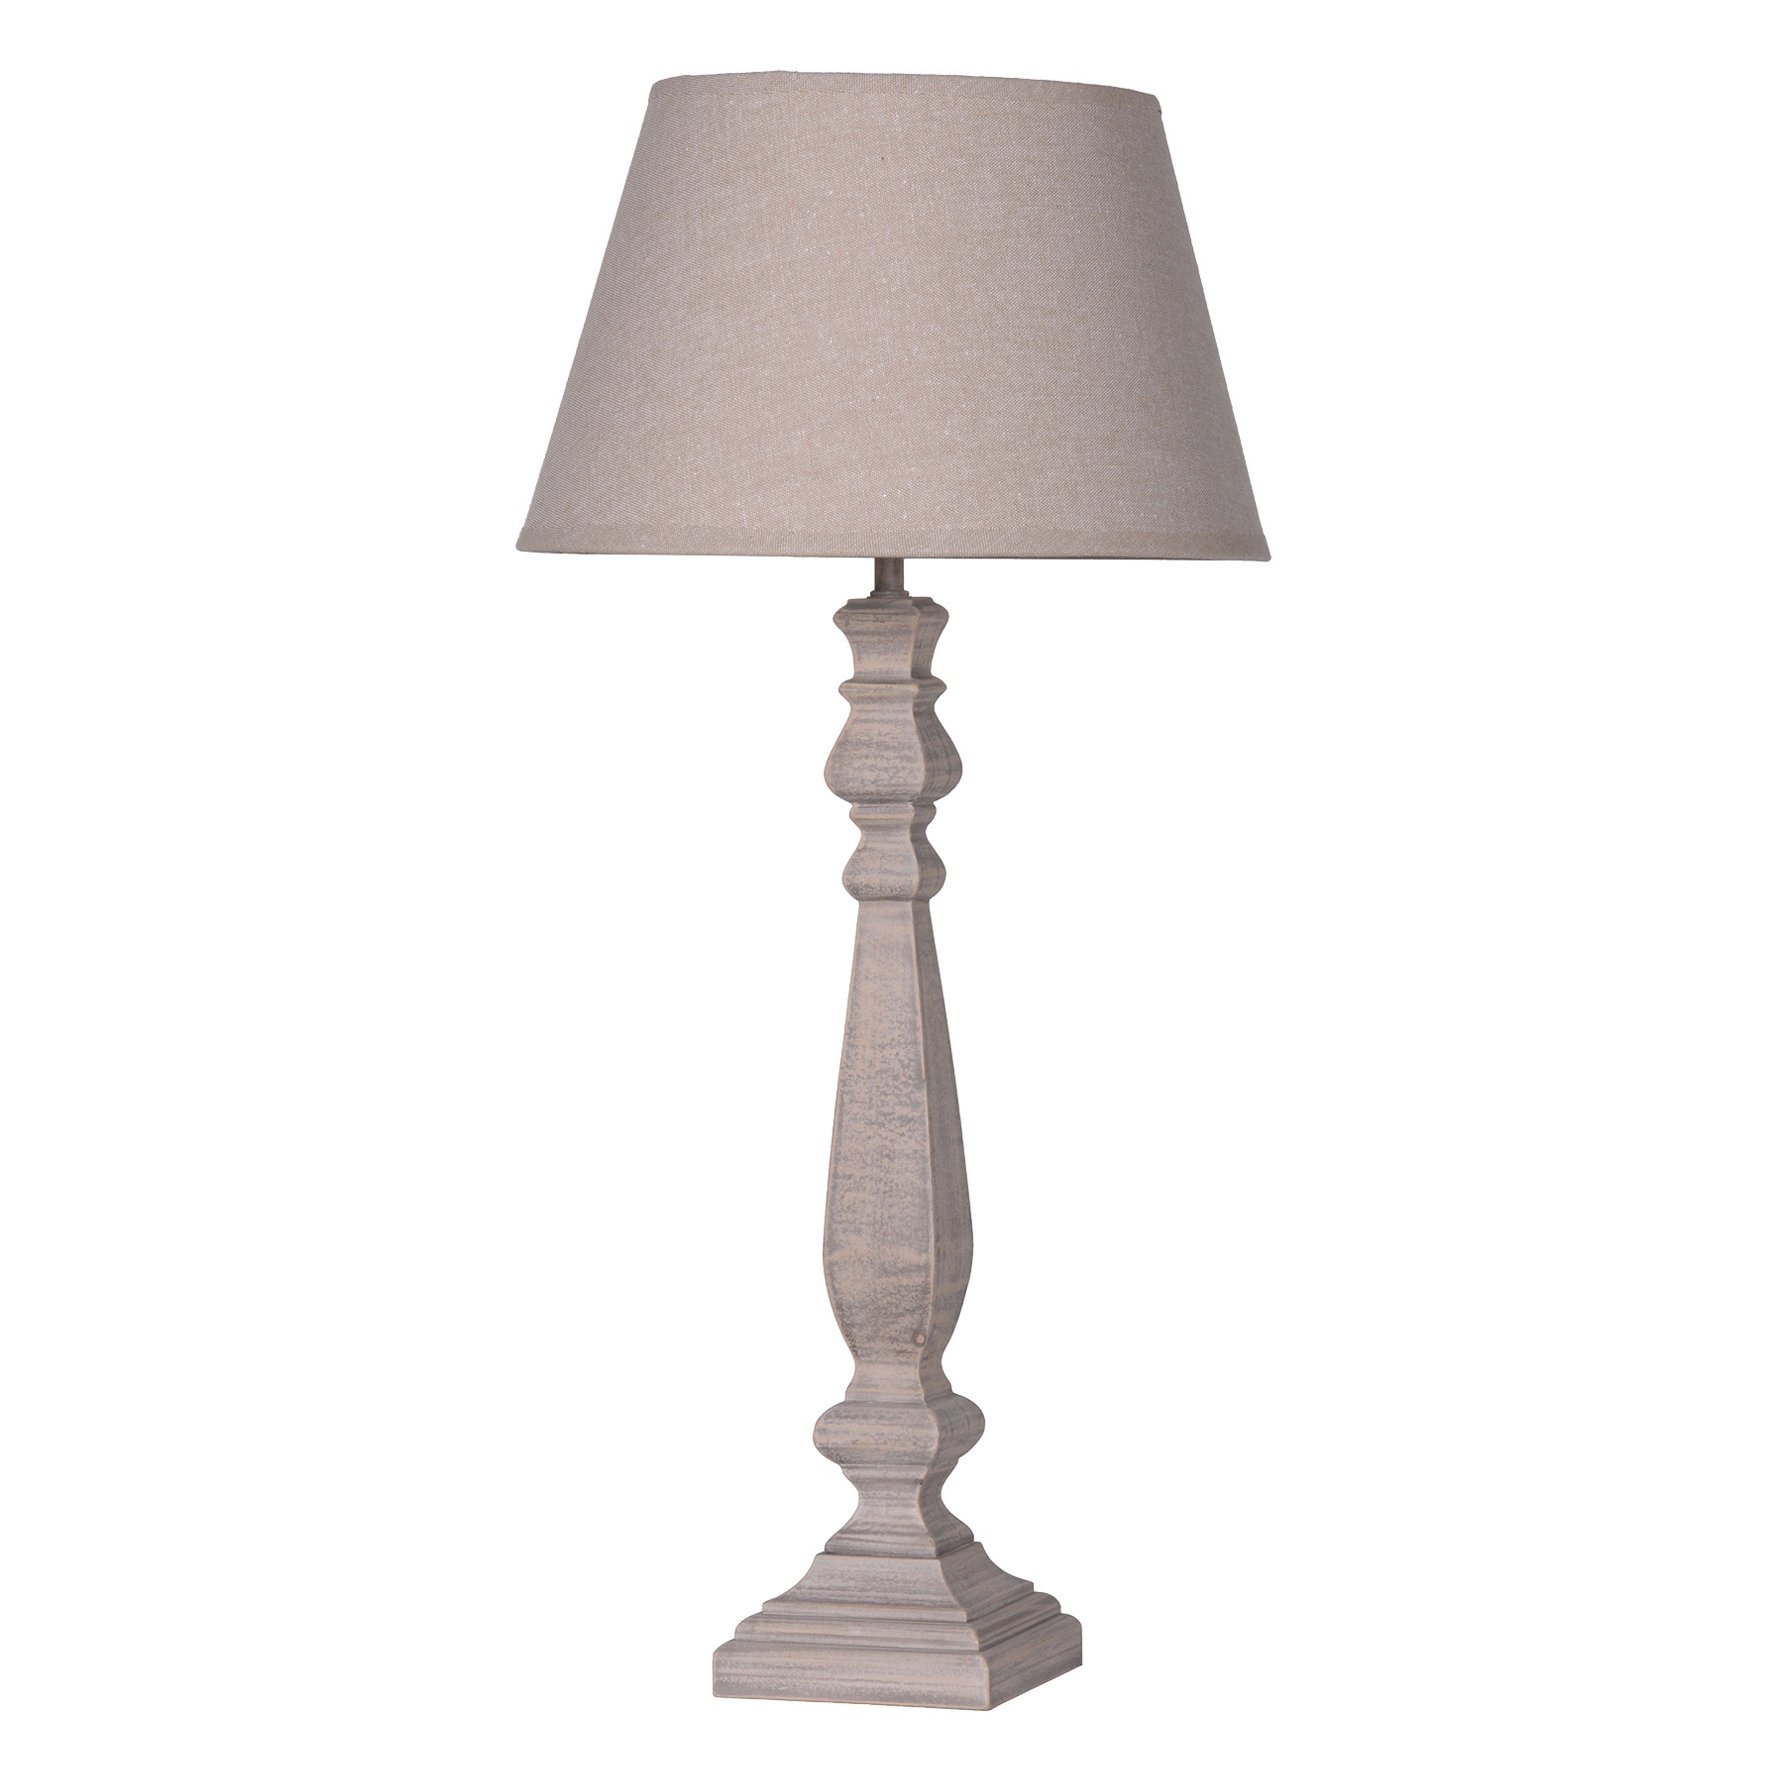 Taupe Wooden Table Lamp | Barker & Stonehouse